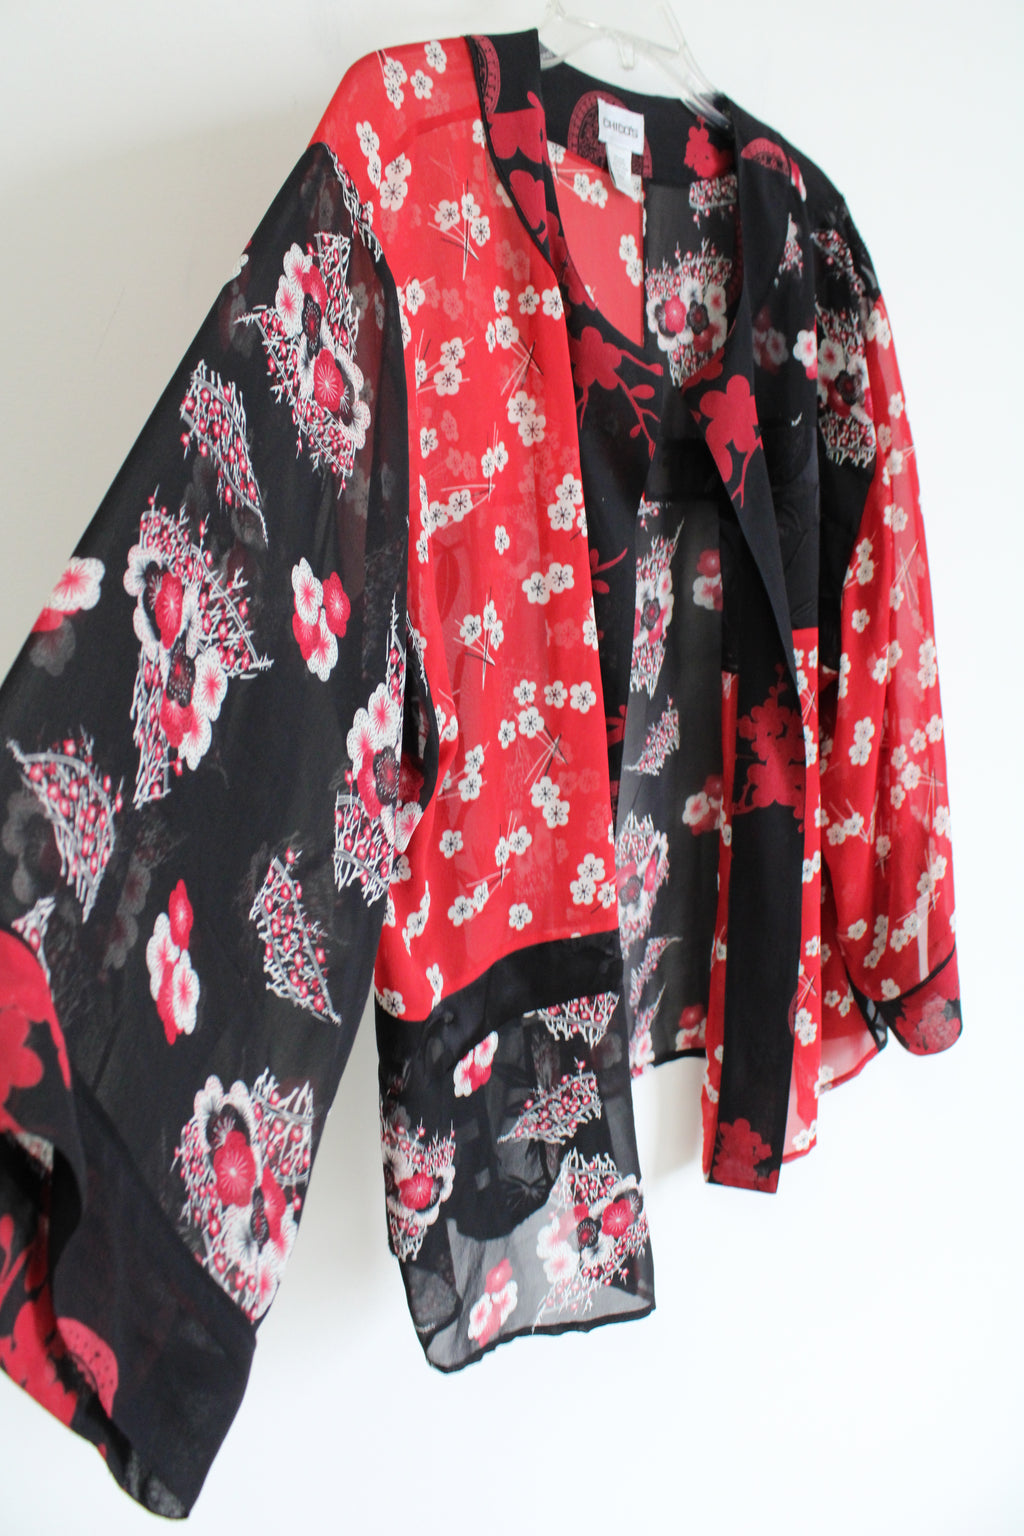 Chico's Silk Sheer Black & Red Patterned Cardigan | 2 (L/12)